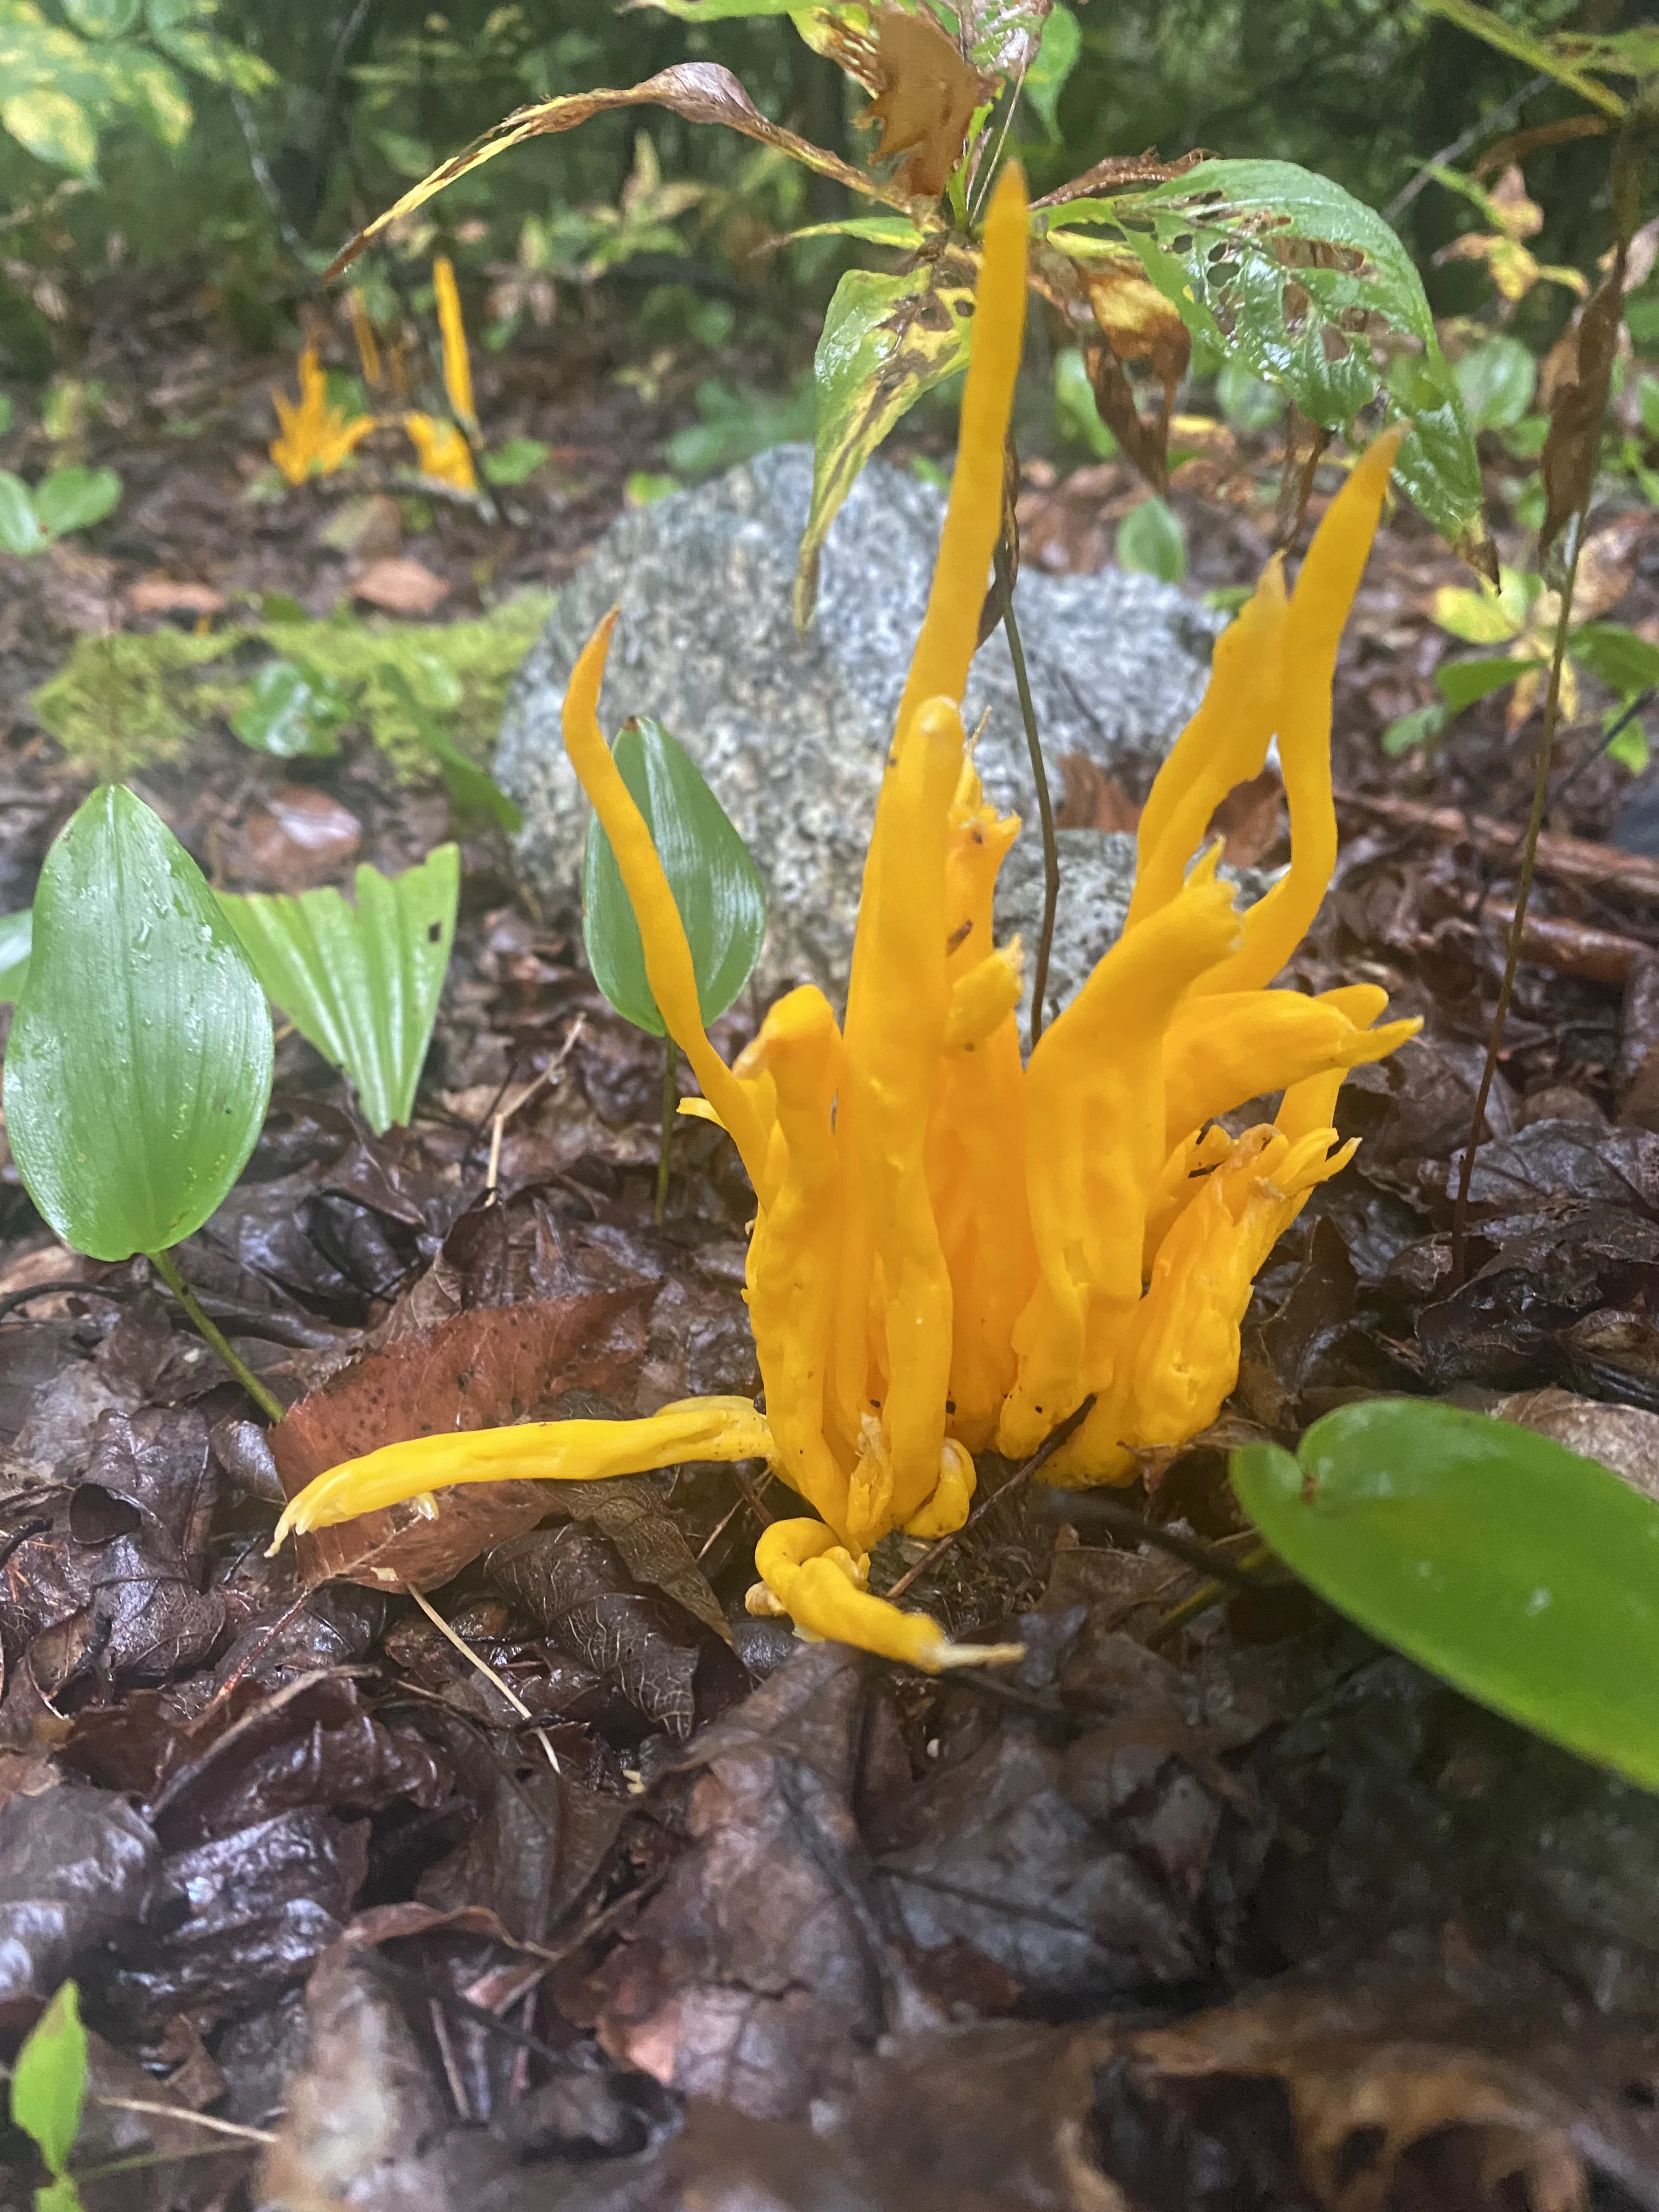 (Nate Coleman) Coral fungus, or Clavulinopsis fusiformis, has been popping up around Halifax's Long Lake Provincial Park after a summer of extreme rain